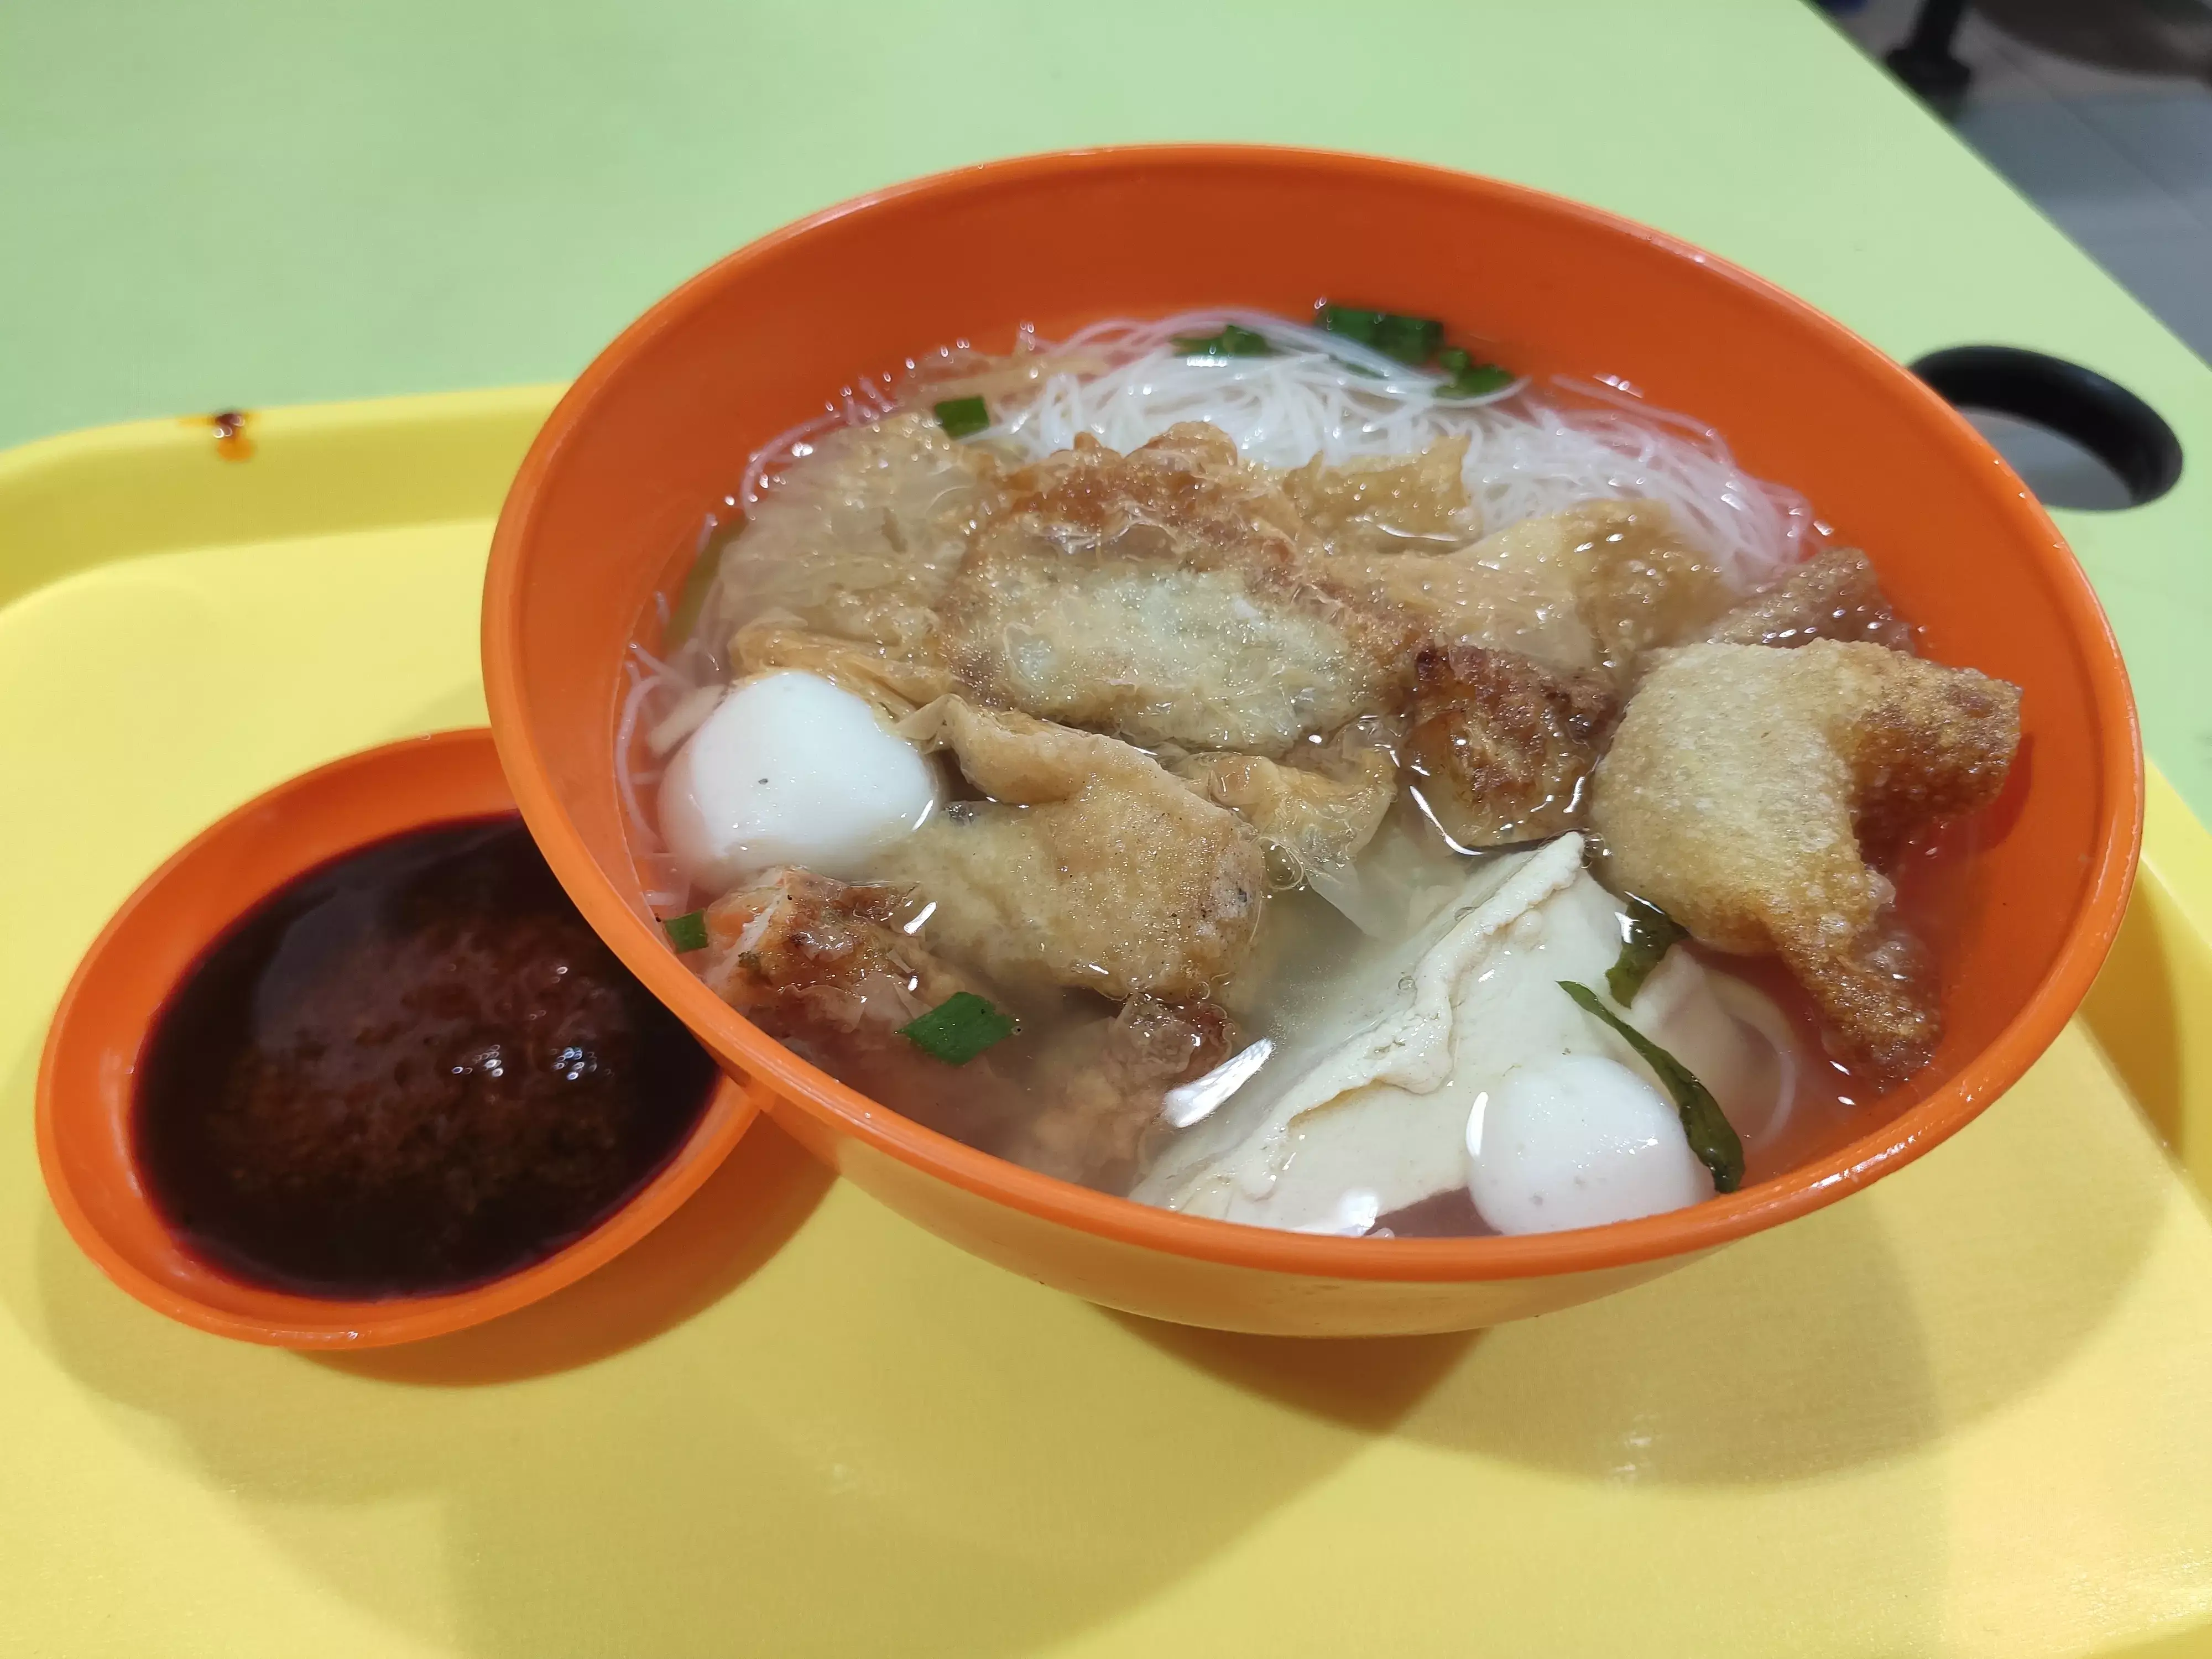 Review: Seng Kee Cooked Food (Singapore)